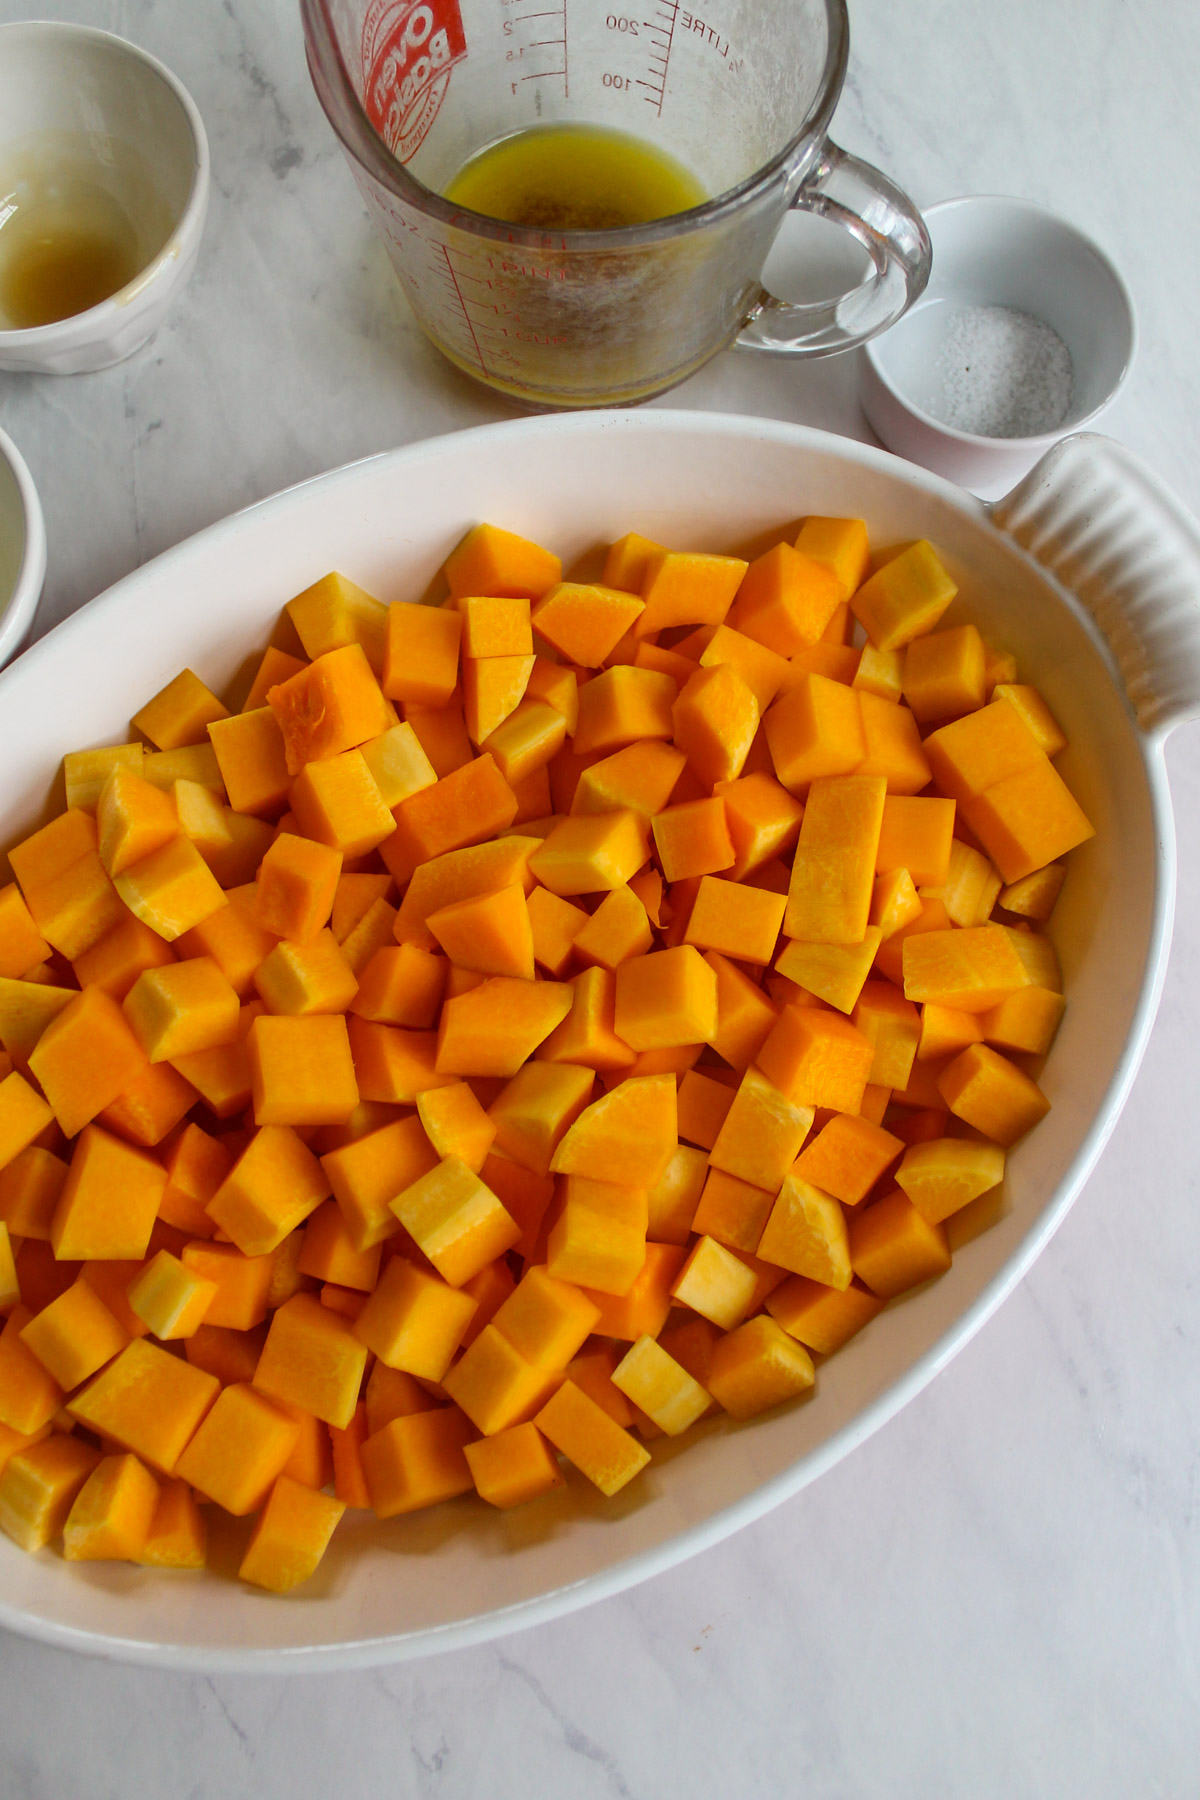 Butternut squash peeled and chopped and added to a white baking dish.